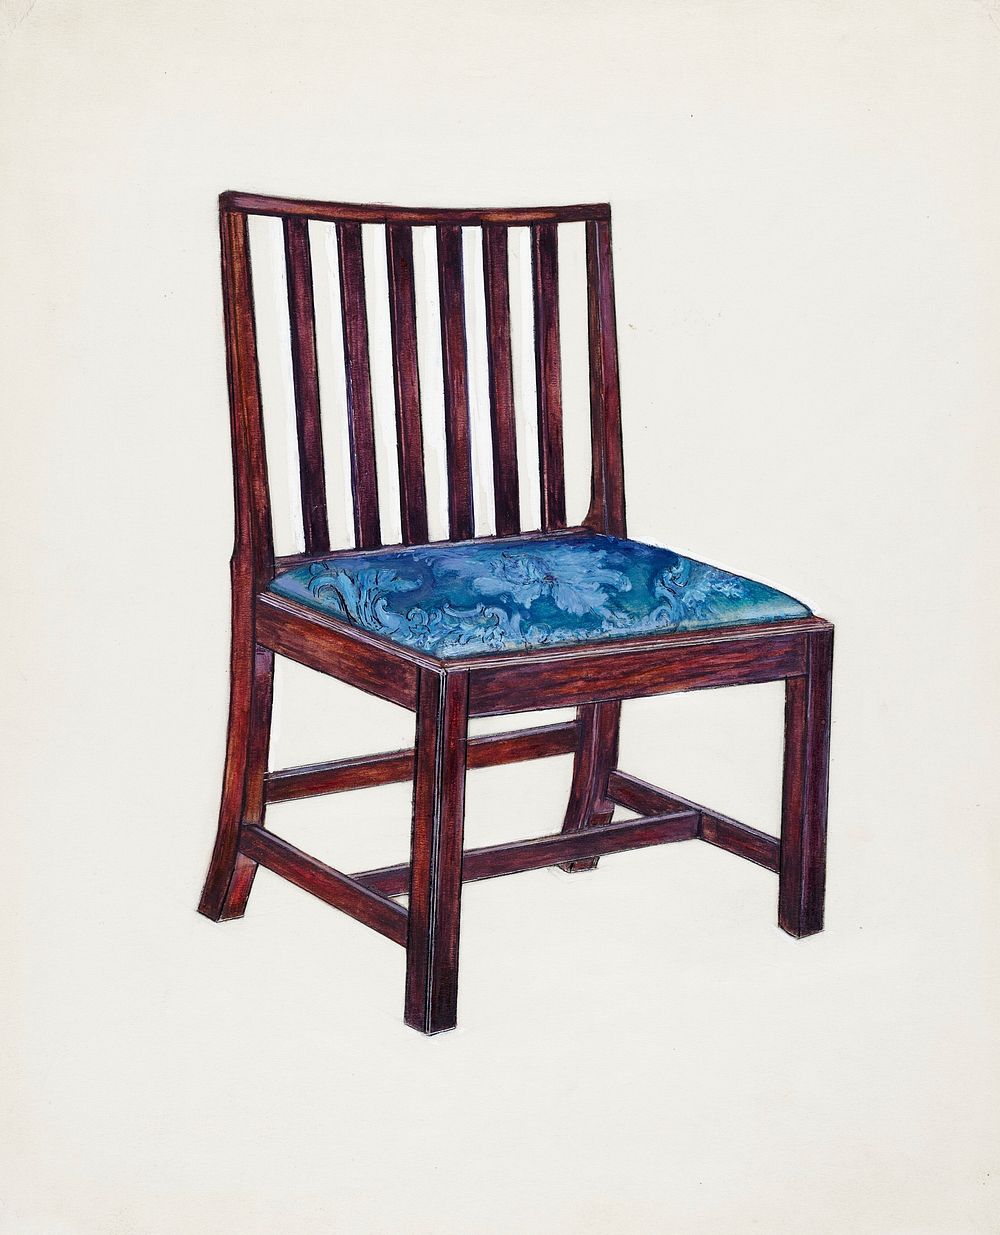 Chair (1935&ndash;1942)  by Harold Smith. Original from The National Gallery of Art. Digitally enhanced by rawpixel.